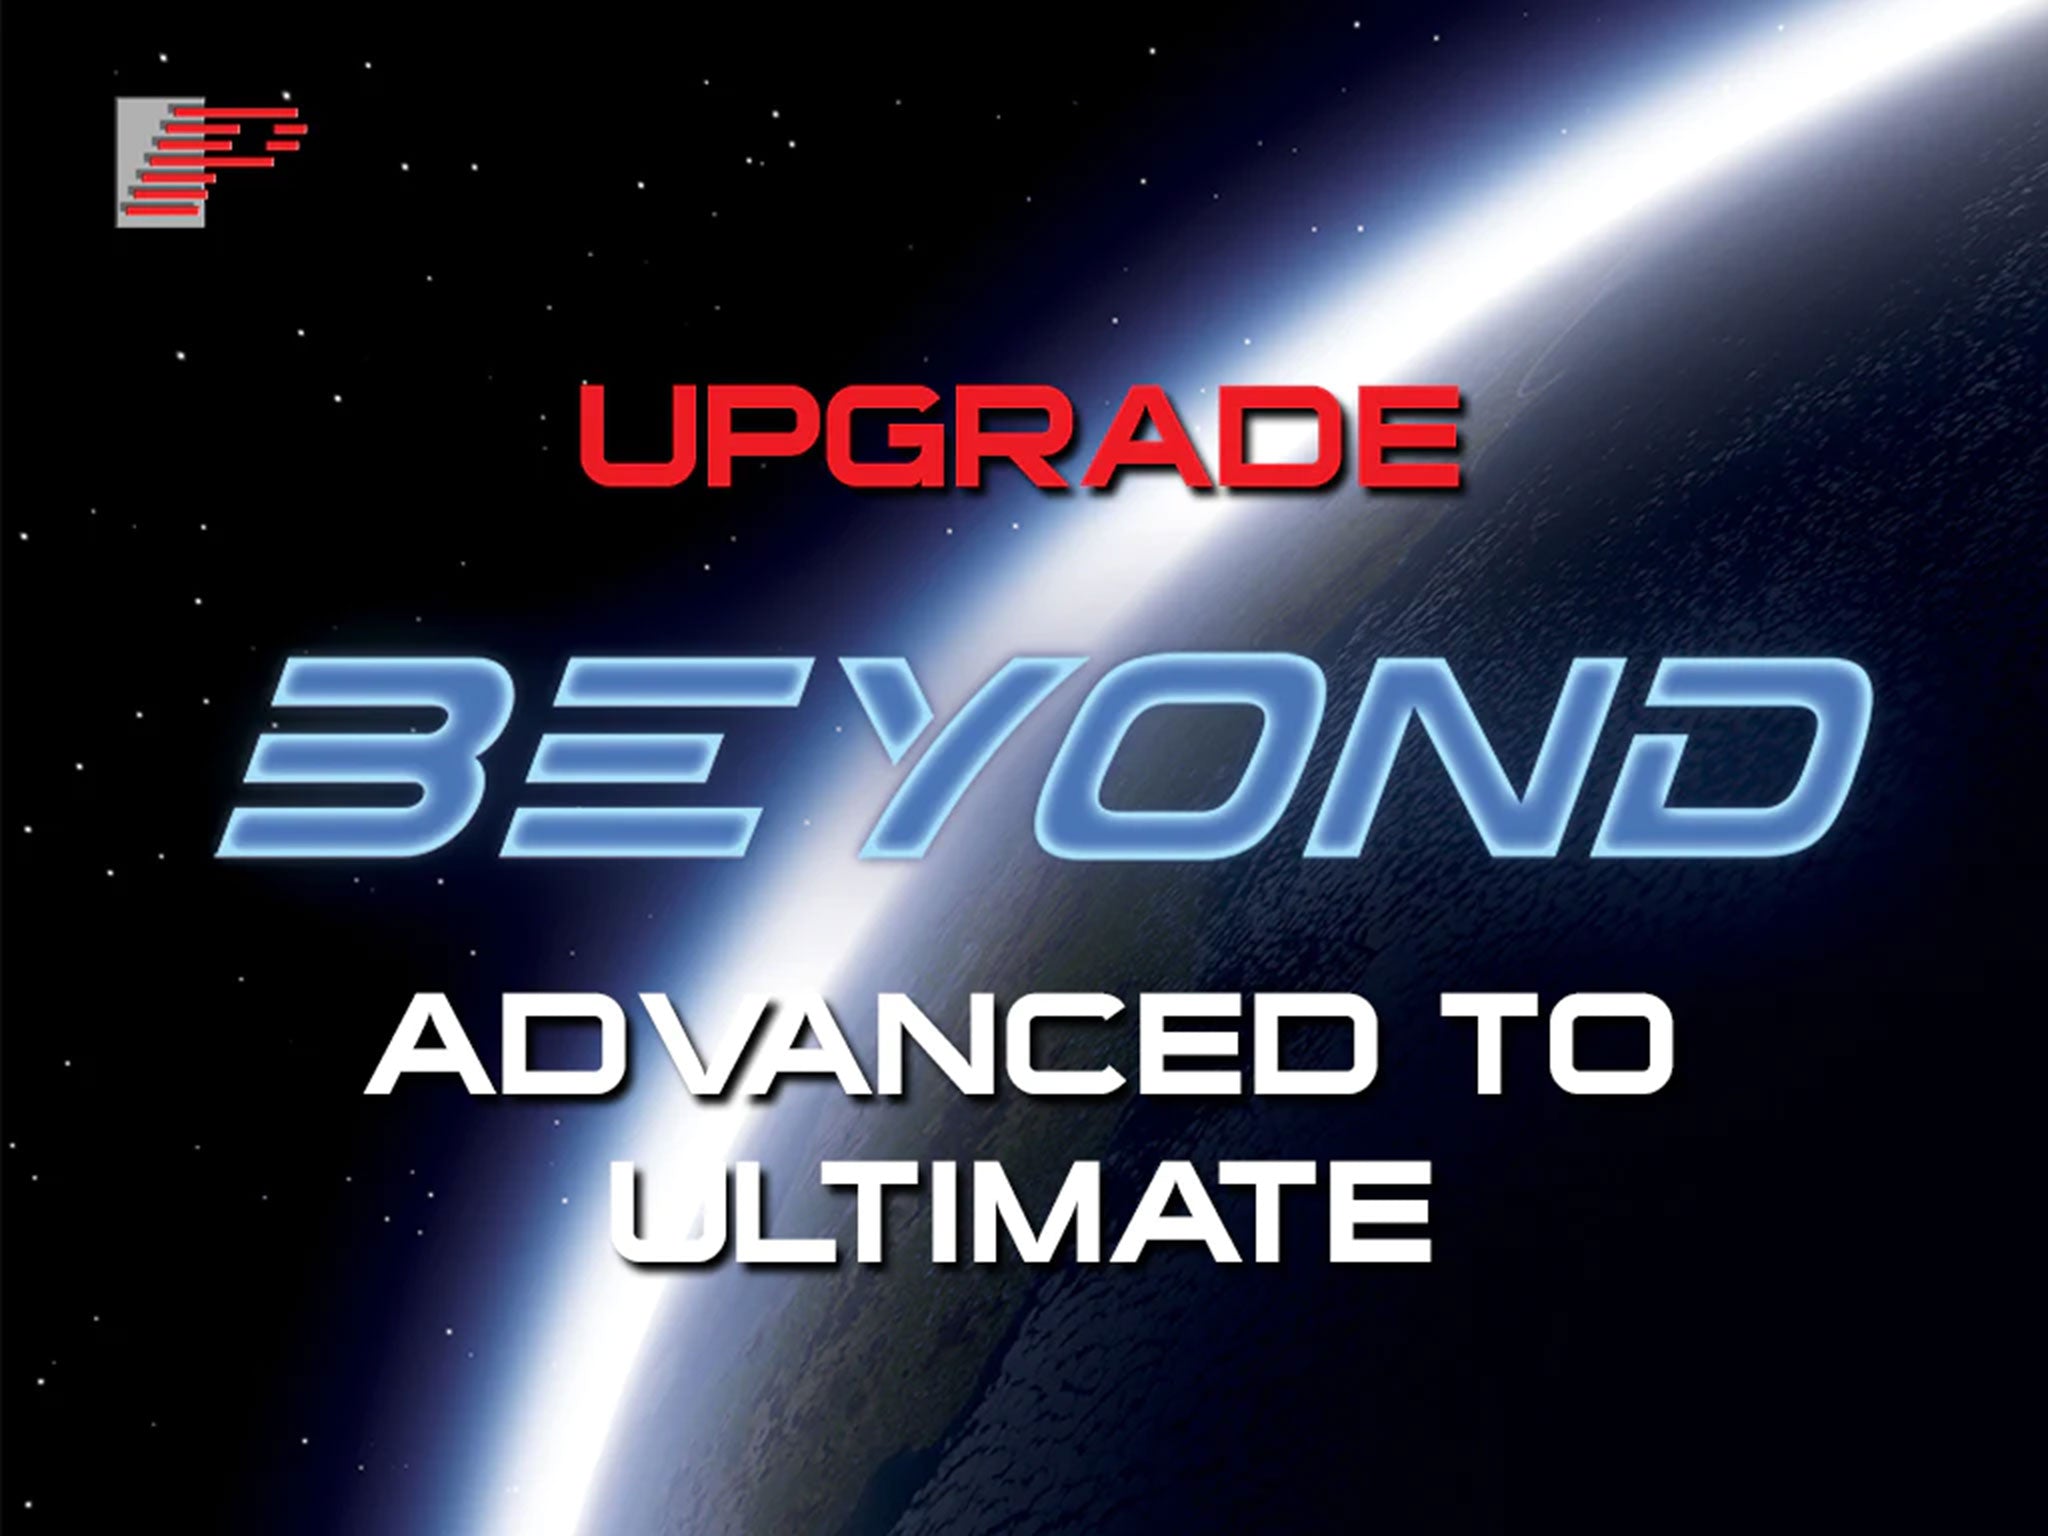 Pangolin BEYOND Advanced to Ultimate license upgrade